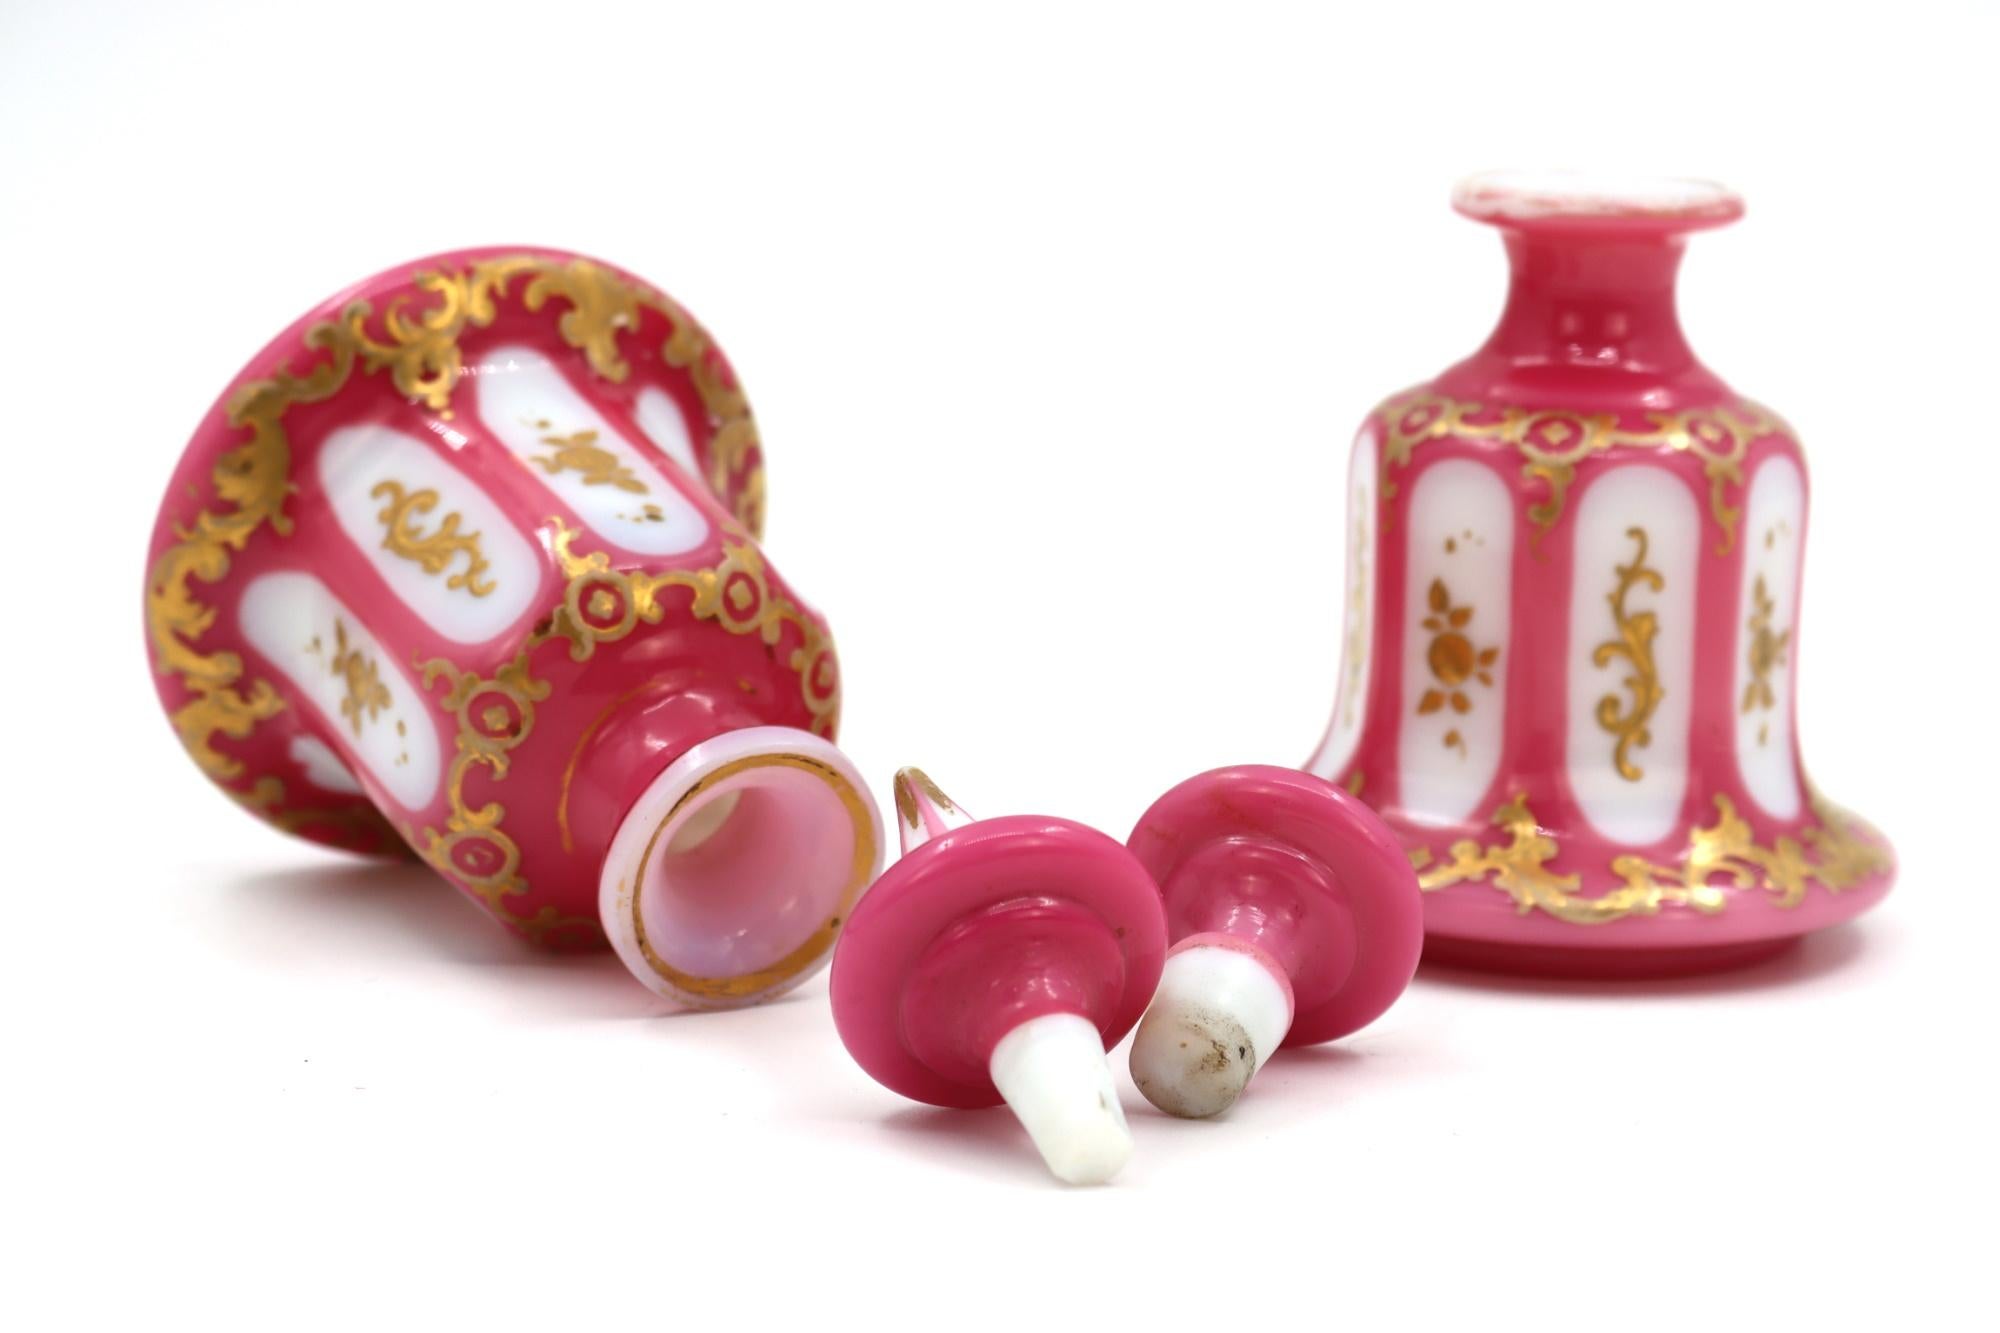 A pair of white opaline and pink overlay perfume bottles, gold enamelled, 19th century, 1840 - 1860.
Measures: H: 15 cm, D: 9 cm.